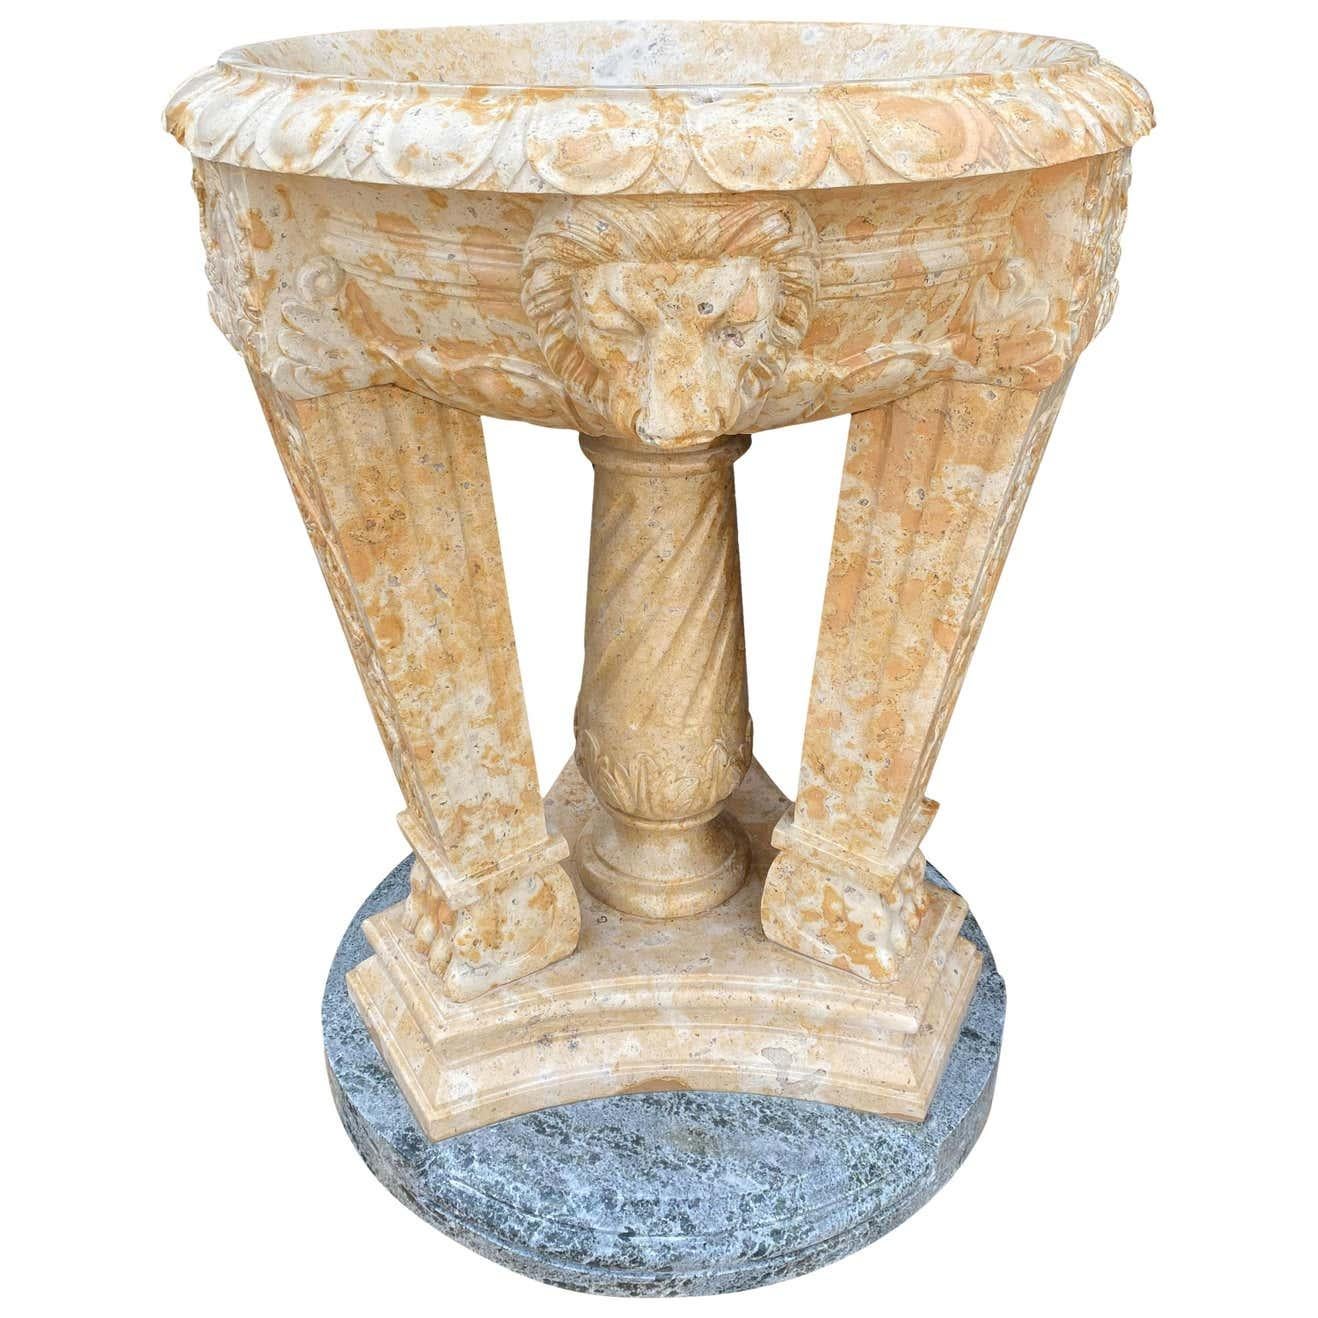 A stunning 20th century two toned marble planter/Tazzer/bird bath. The frieze is decorated with lion masks and lion paw feet, standing on a Verdi Antico marble base, and a central twisted column. Ideal for exterior use.